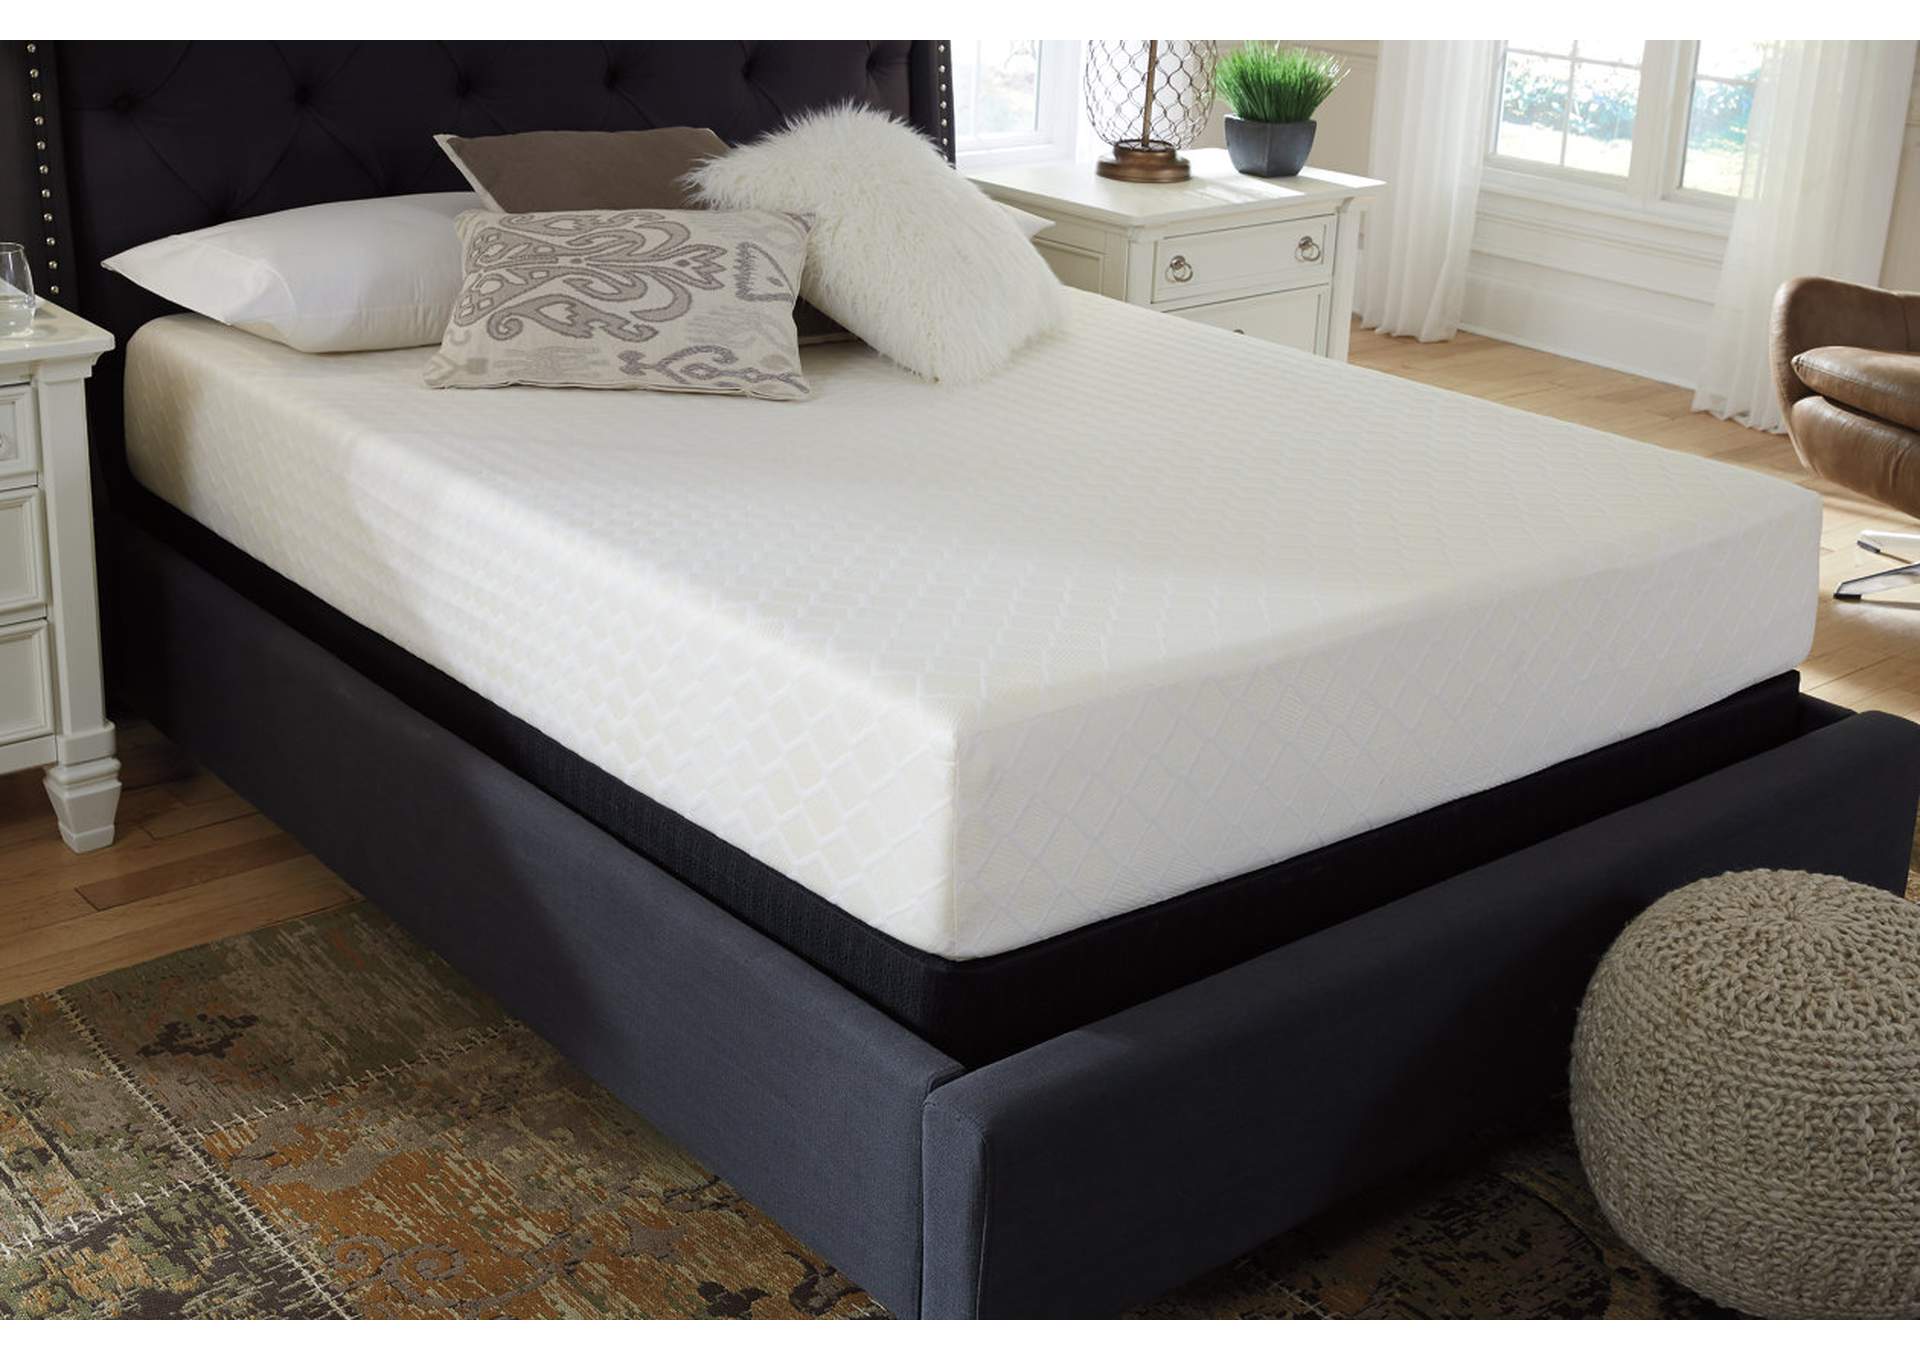 10 Inch Chime Memory Foam Twin Mattress in a Box,Direct To Consumer Express